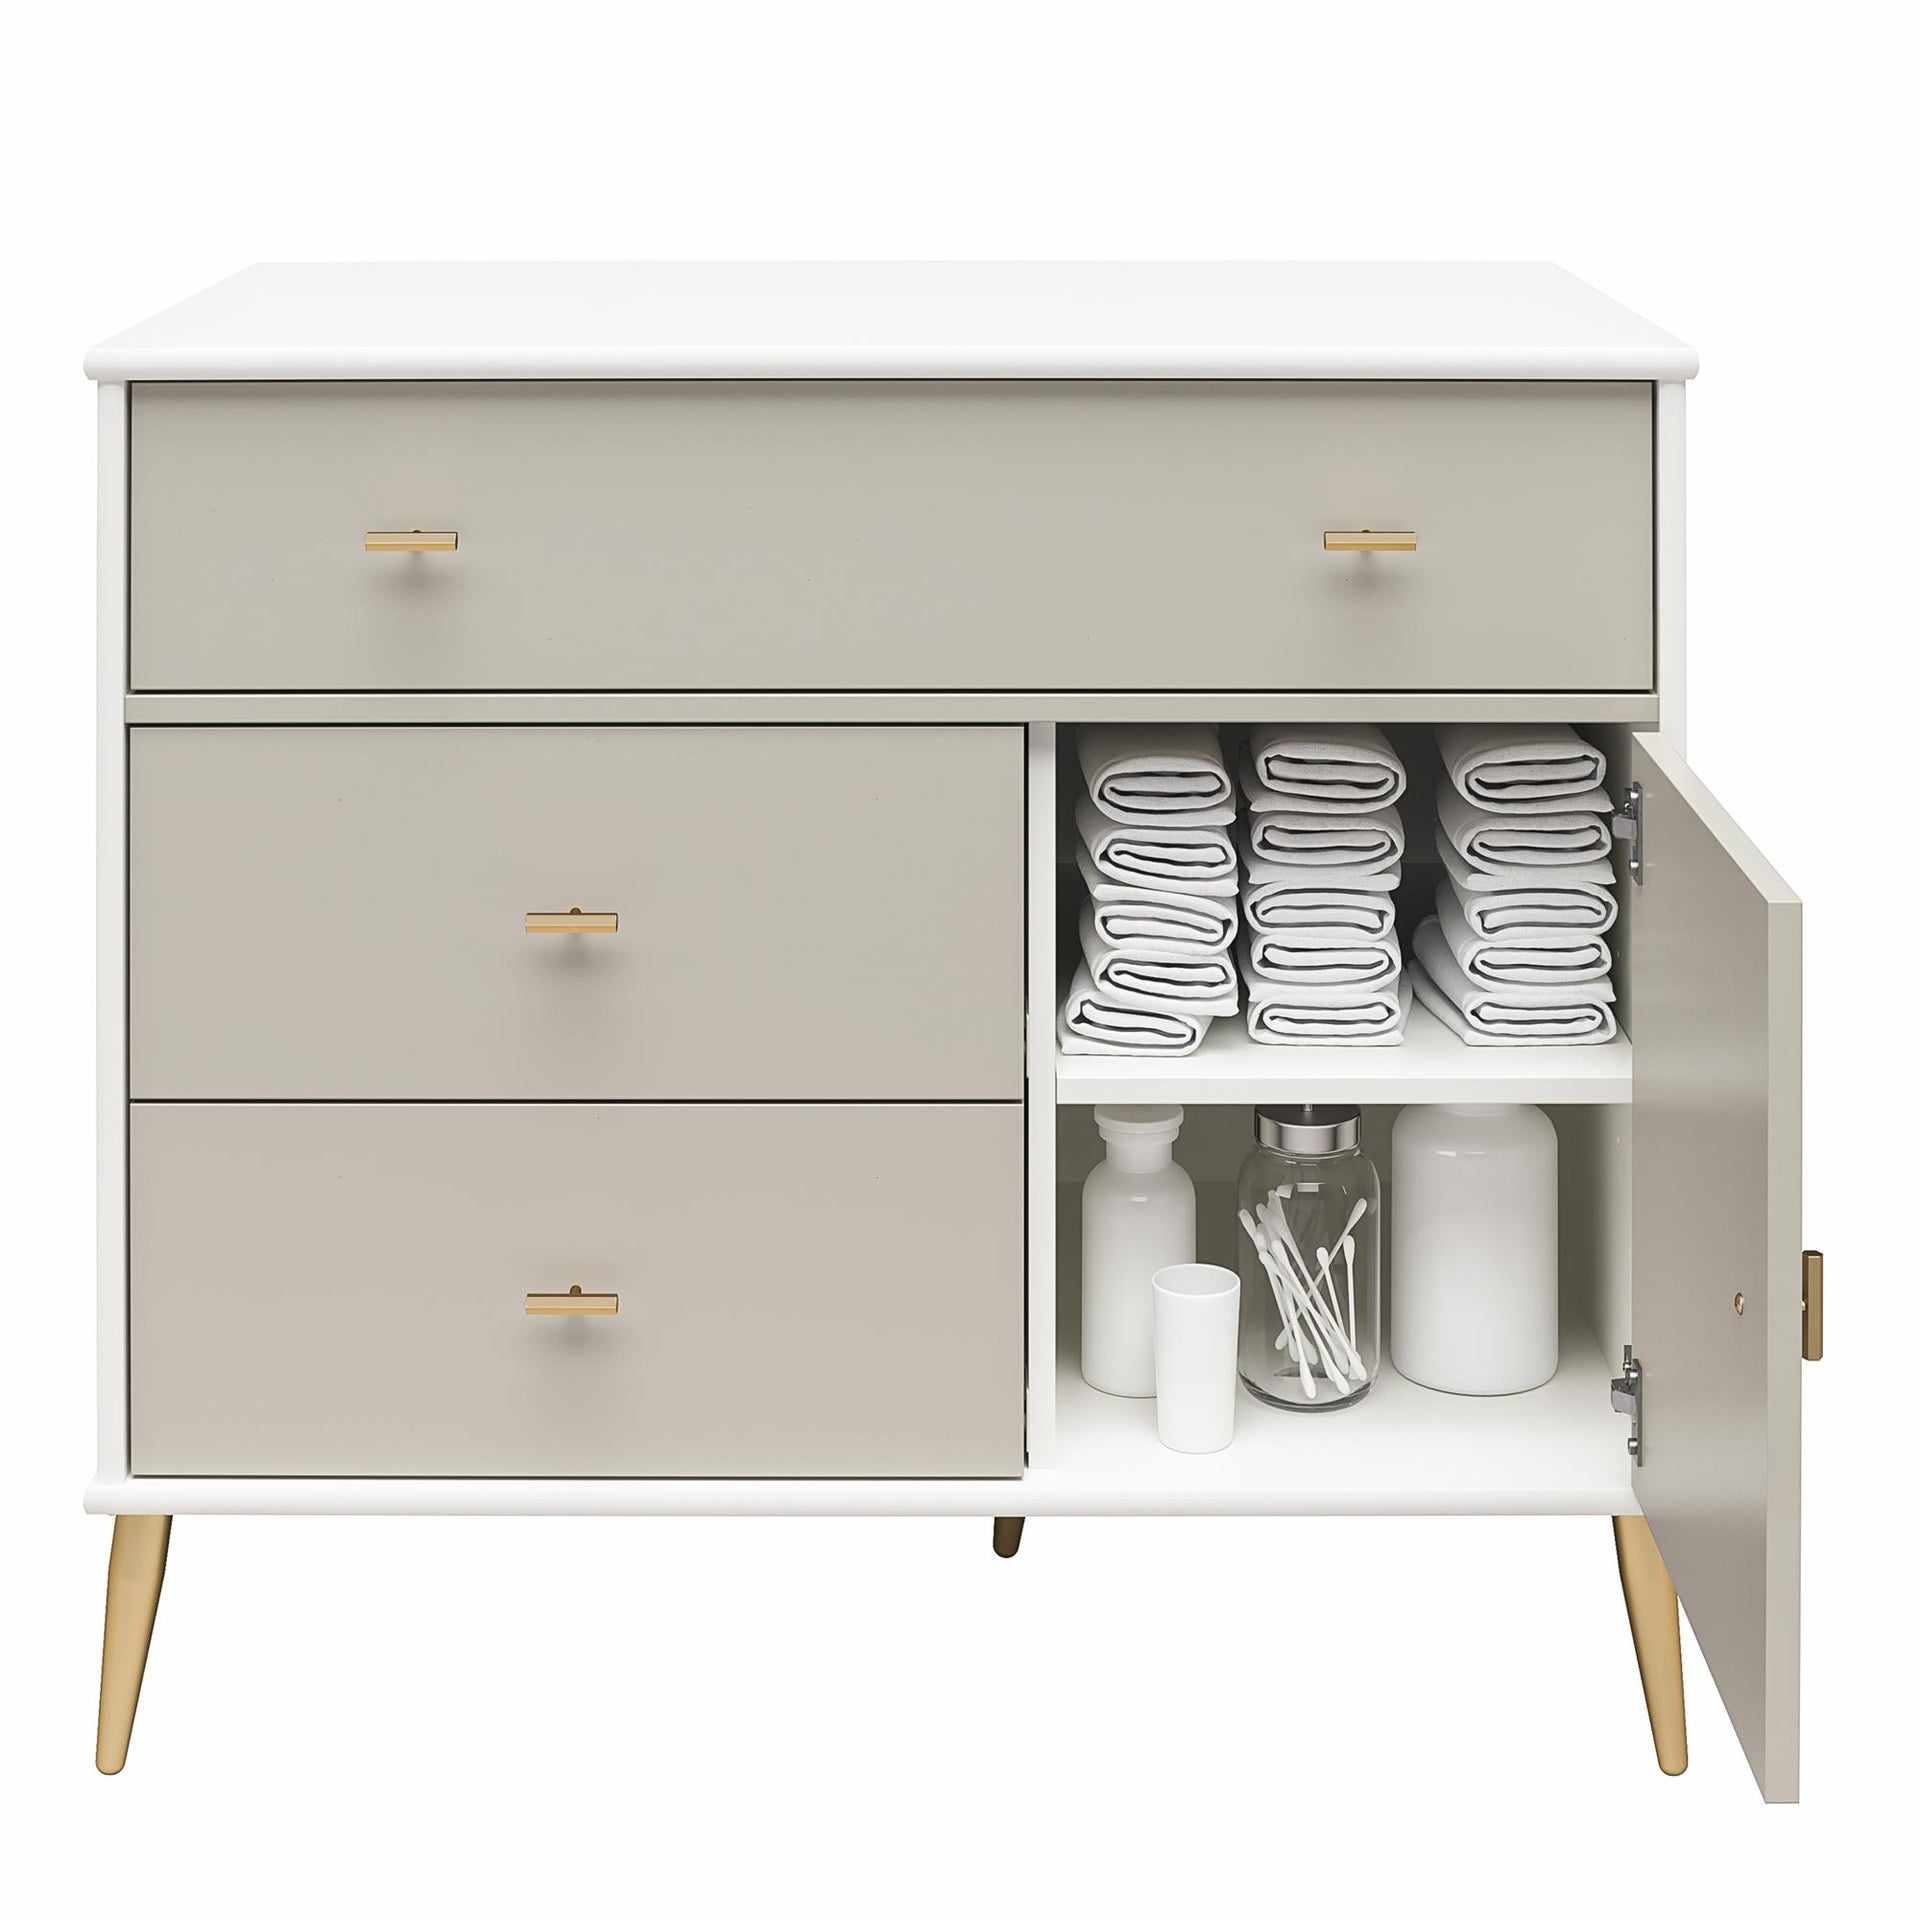 Valentina Asymmetrical 3 Drawer / 1 Door Convertible Dresser, White and Taupe - White / Grey